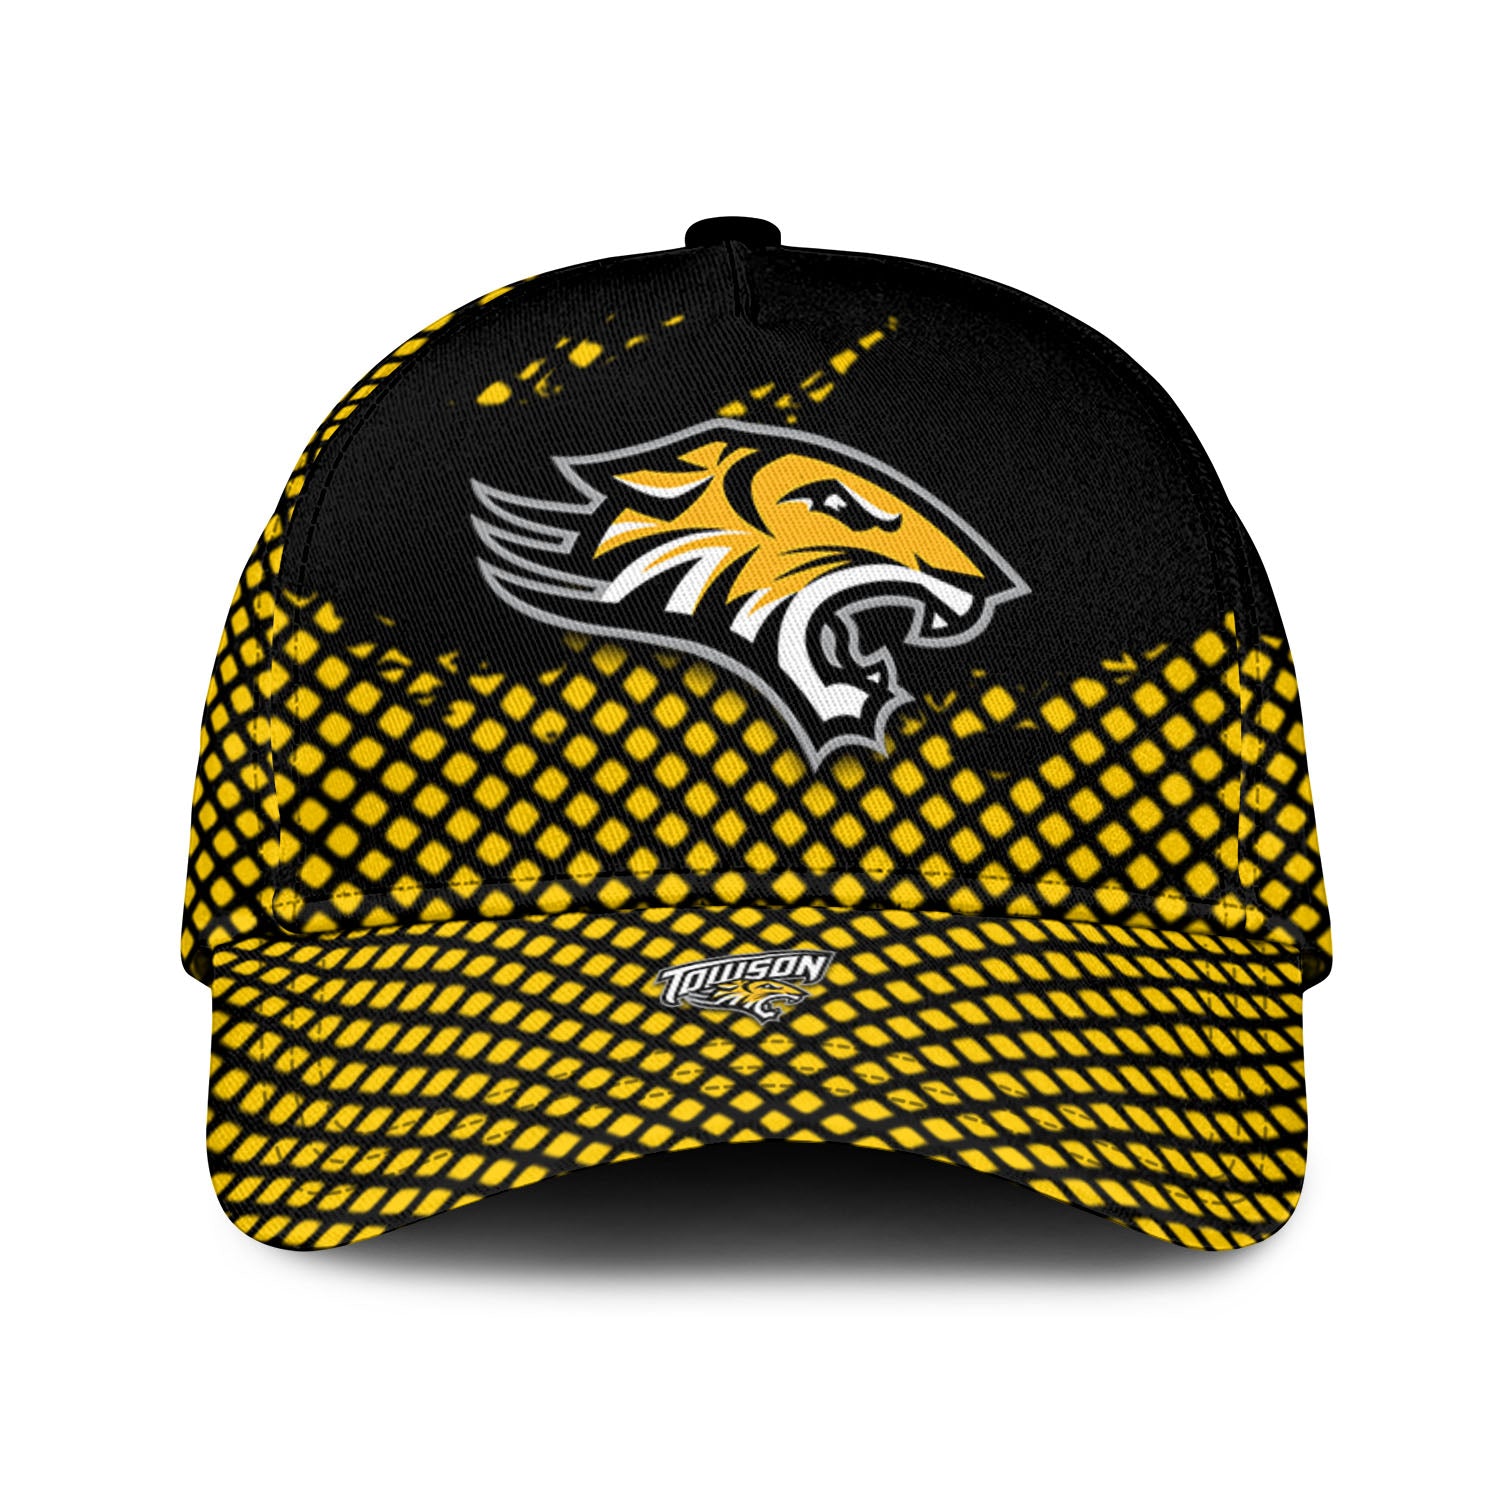 Towson Tigers NCAA Classic Cap Net Pattern Grunge Style – Hothot